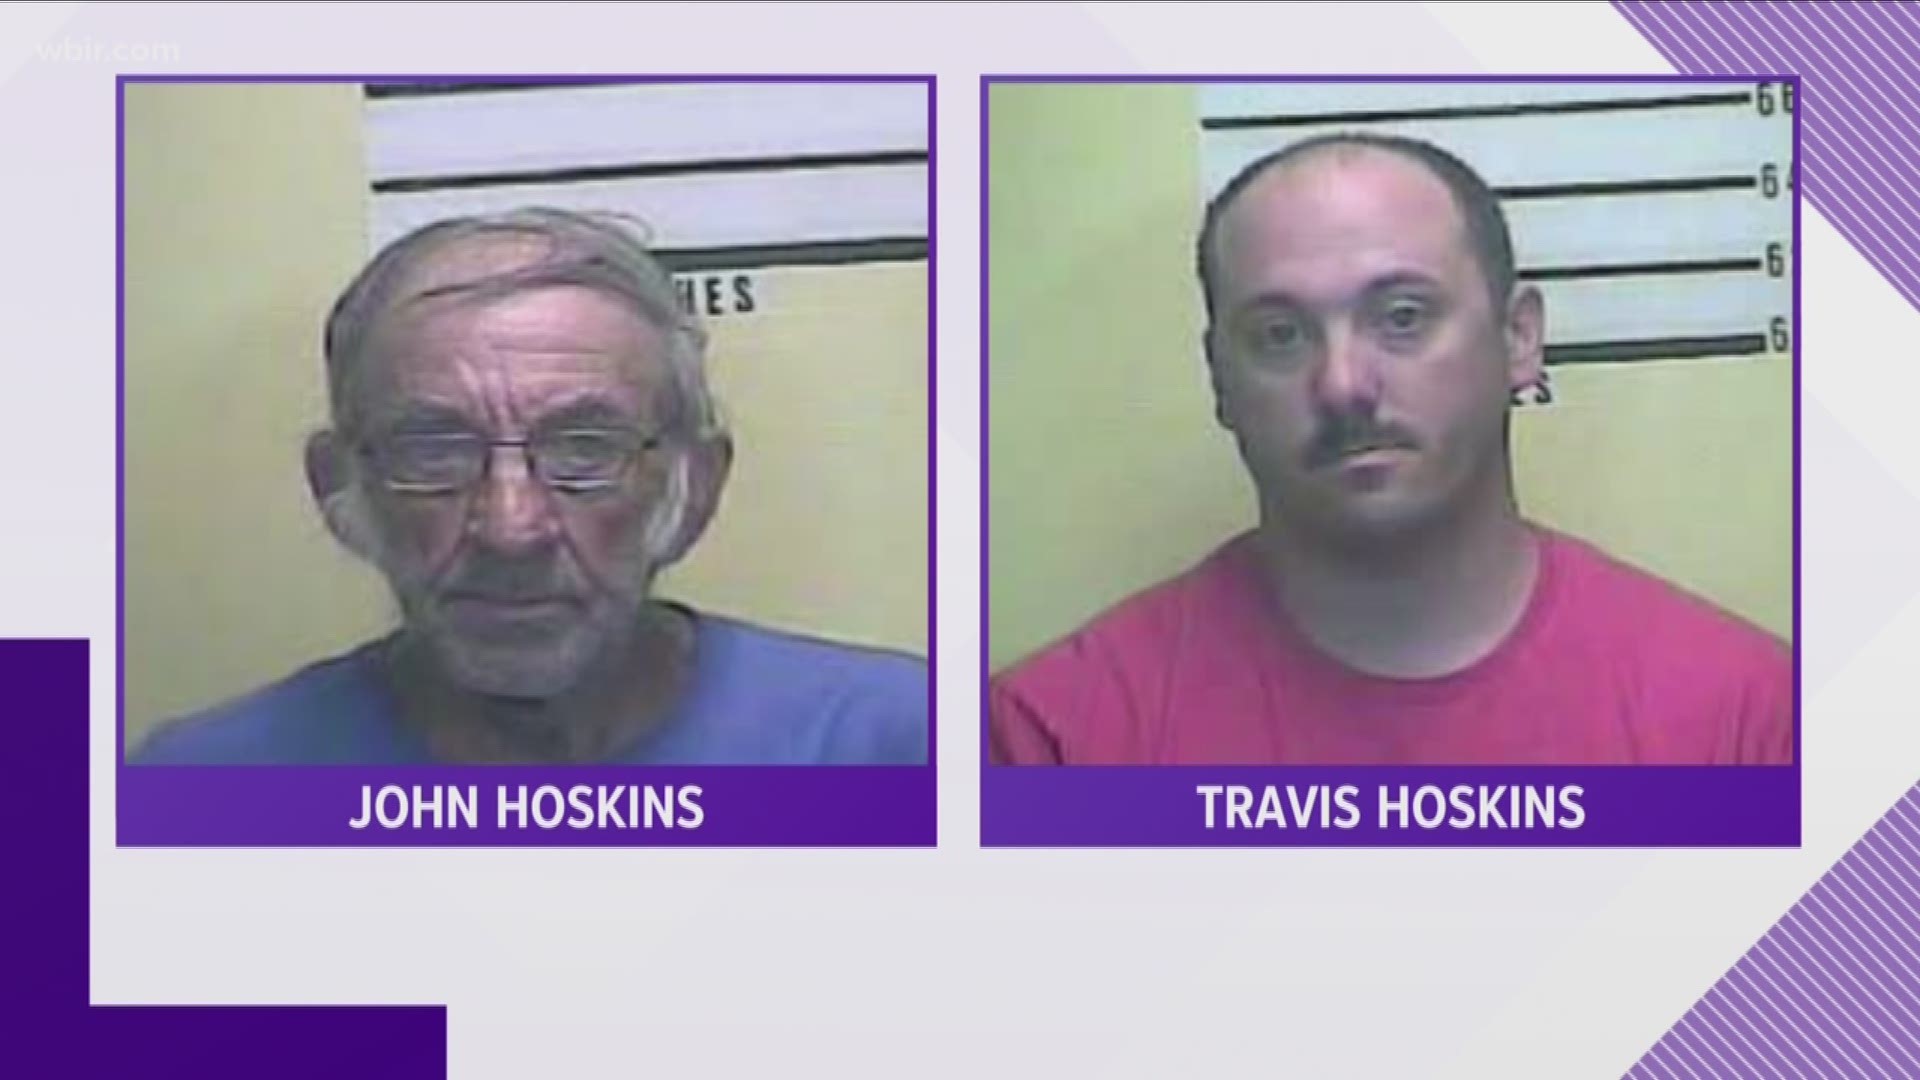 A Kentucky father and son were arrested today on sexual abuse charges. Kentucky State Police says an investigation began in March after two girls reported them.